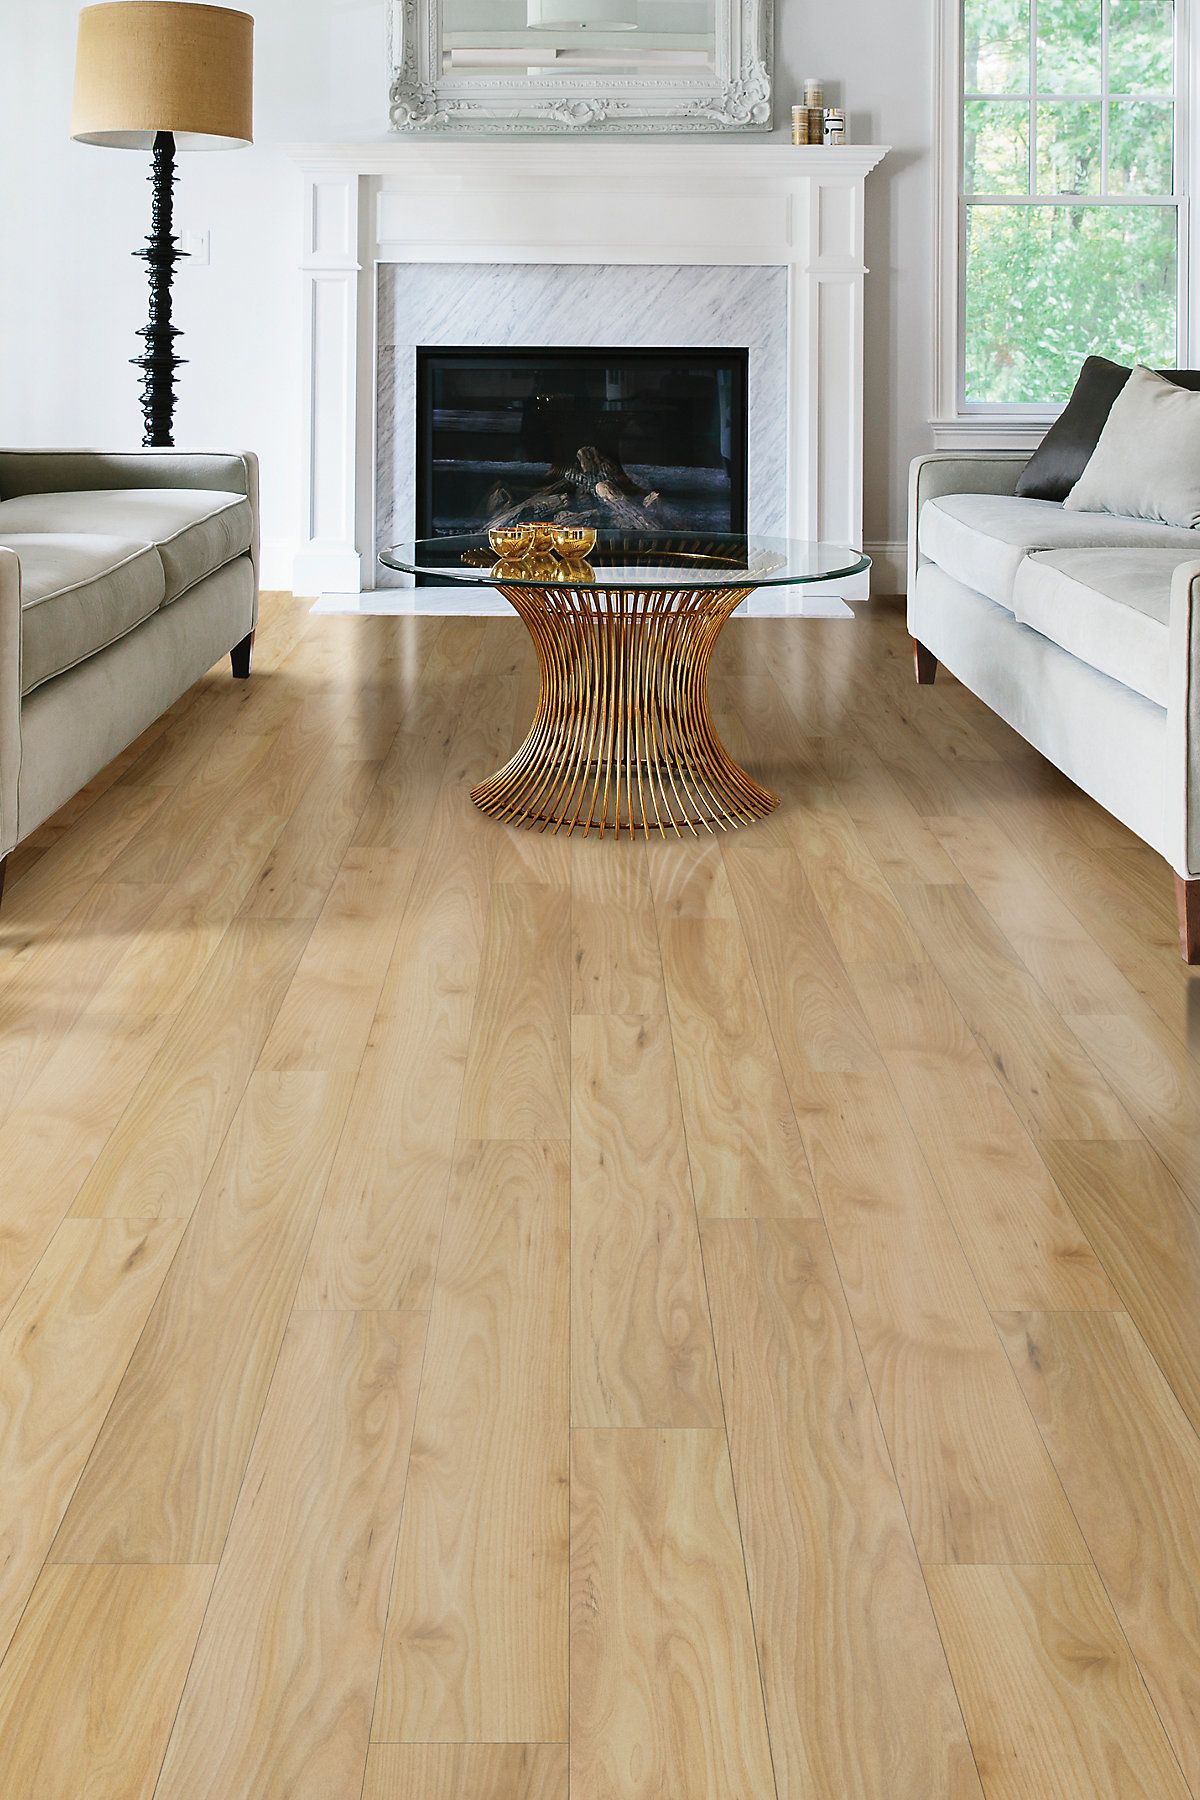 How to clean shaw laminate flooring?